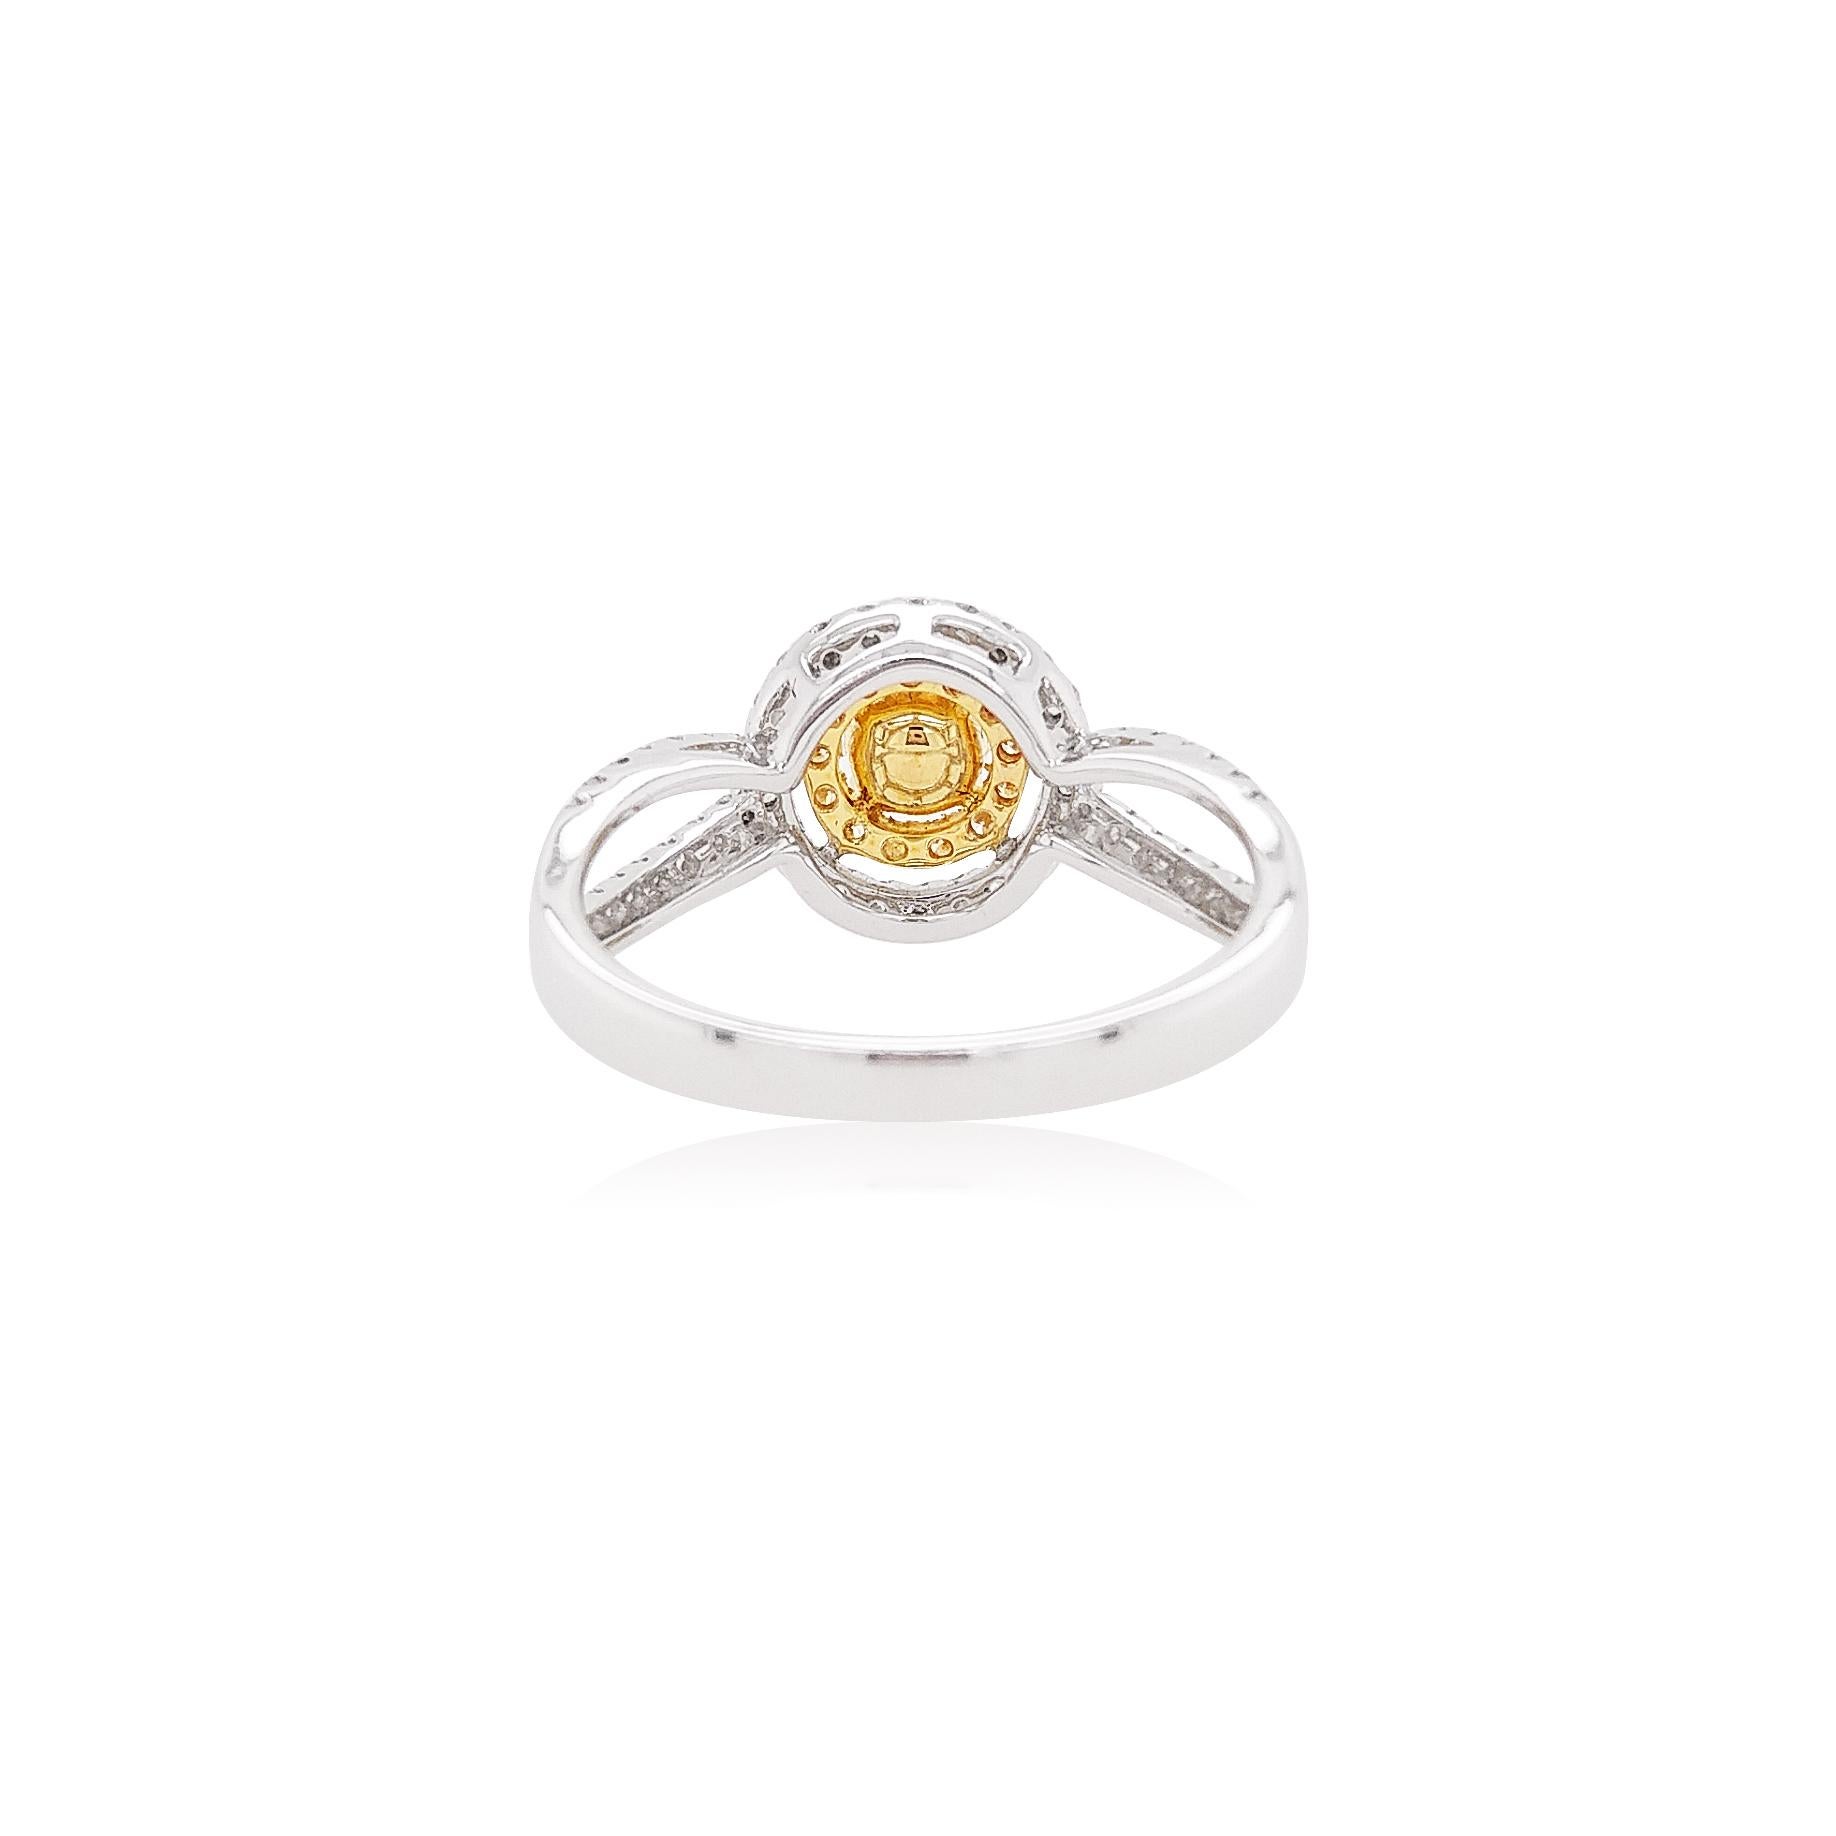 This elegant 18K gold ring features a lustrous natural Yellow Diamond at its centre, with delicate halos of yellow diamonds and white diamonds surrounding it. Set in 18 Karat white and yellow gold to enrich the spectacular hues of the centre